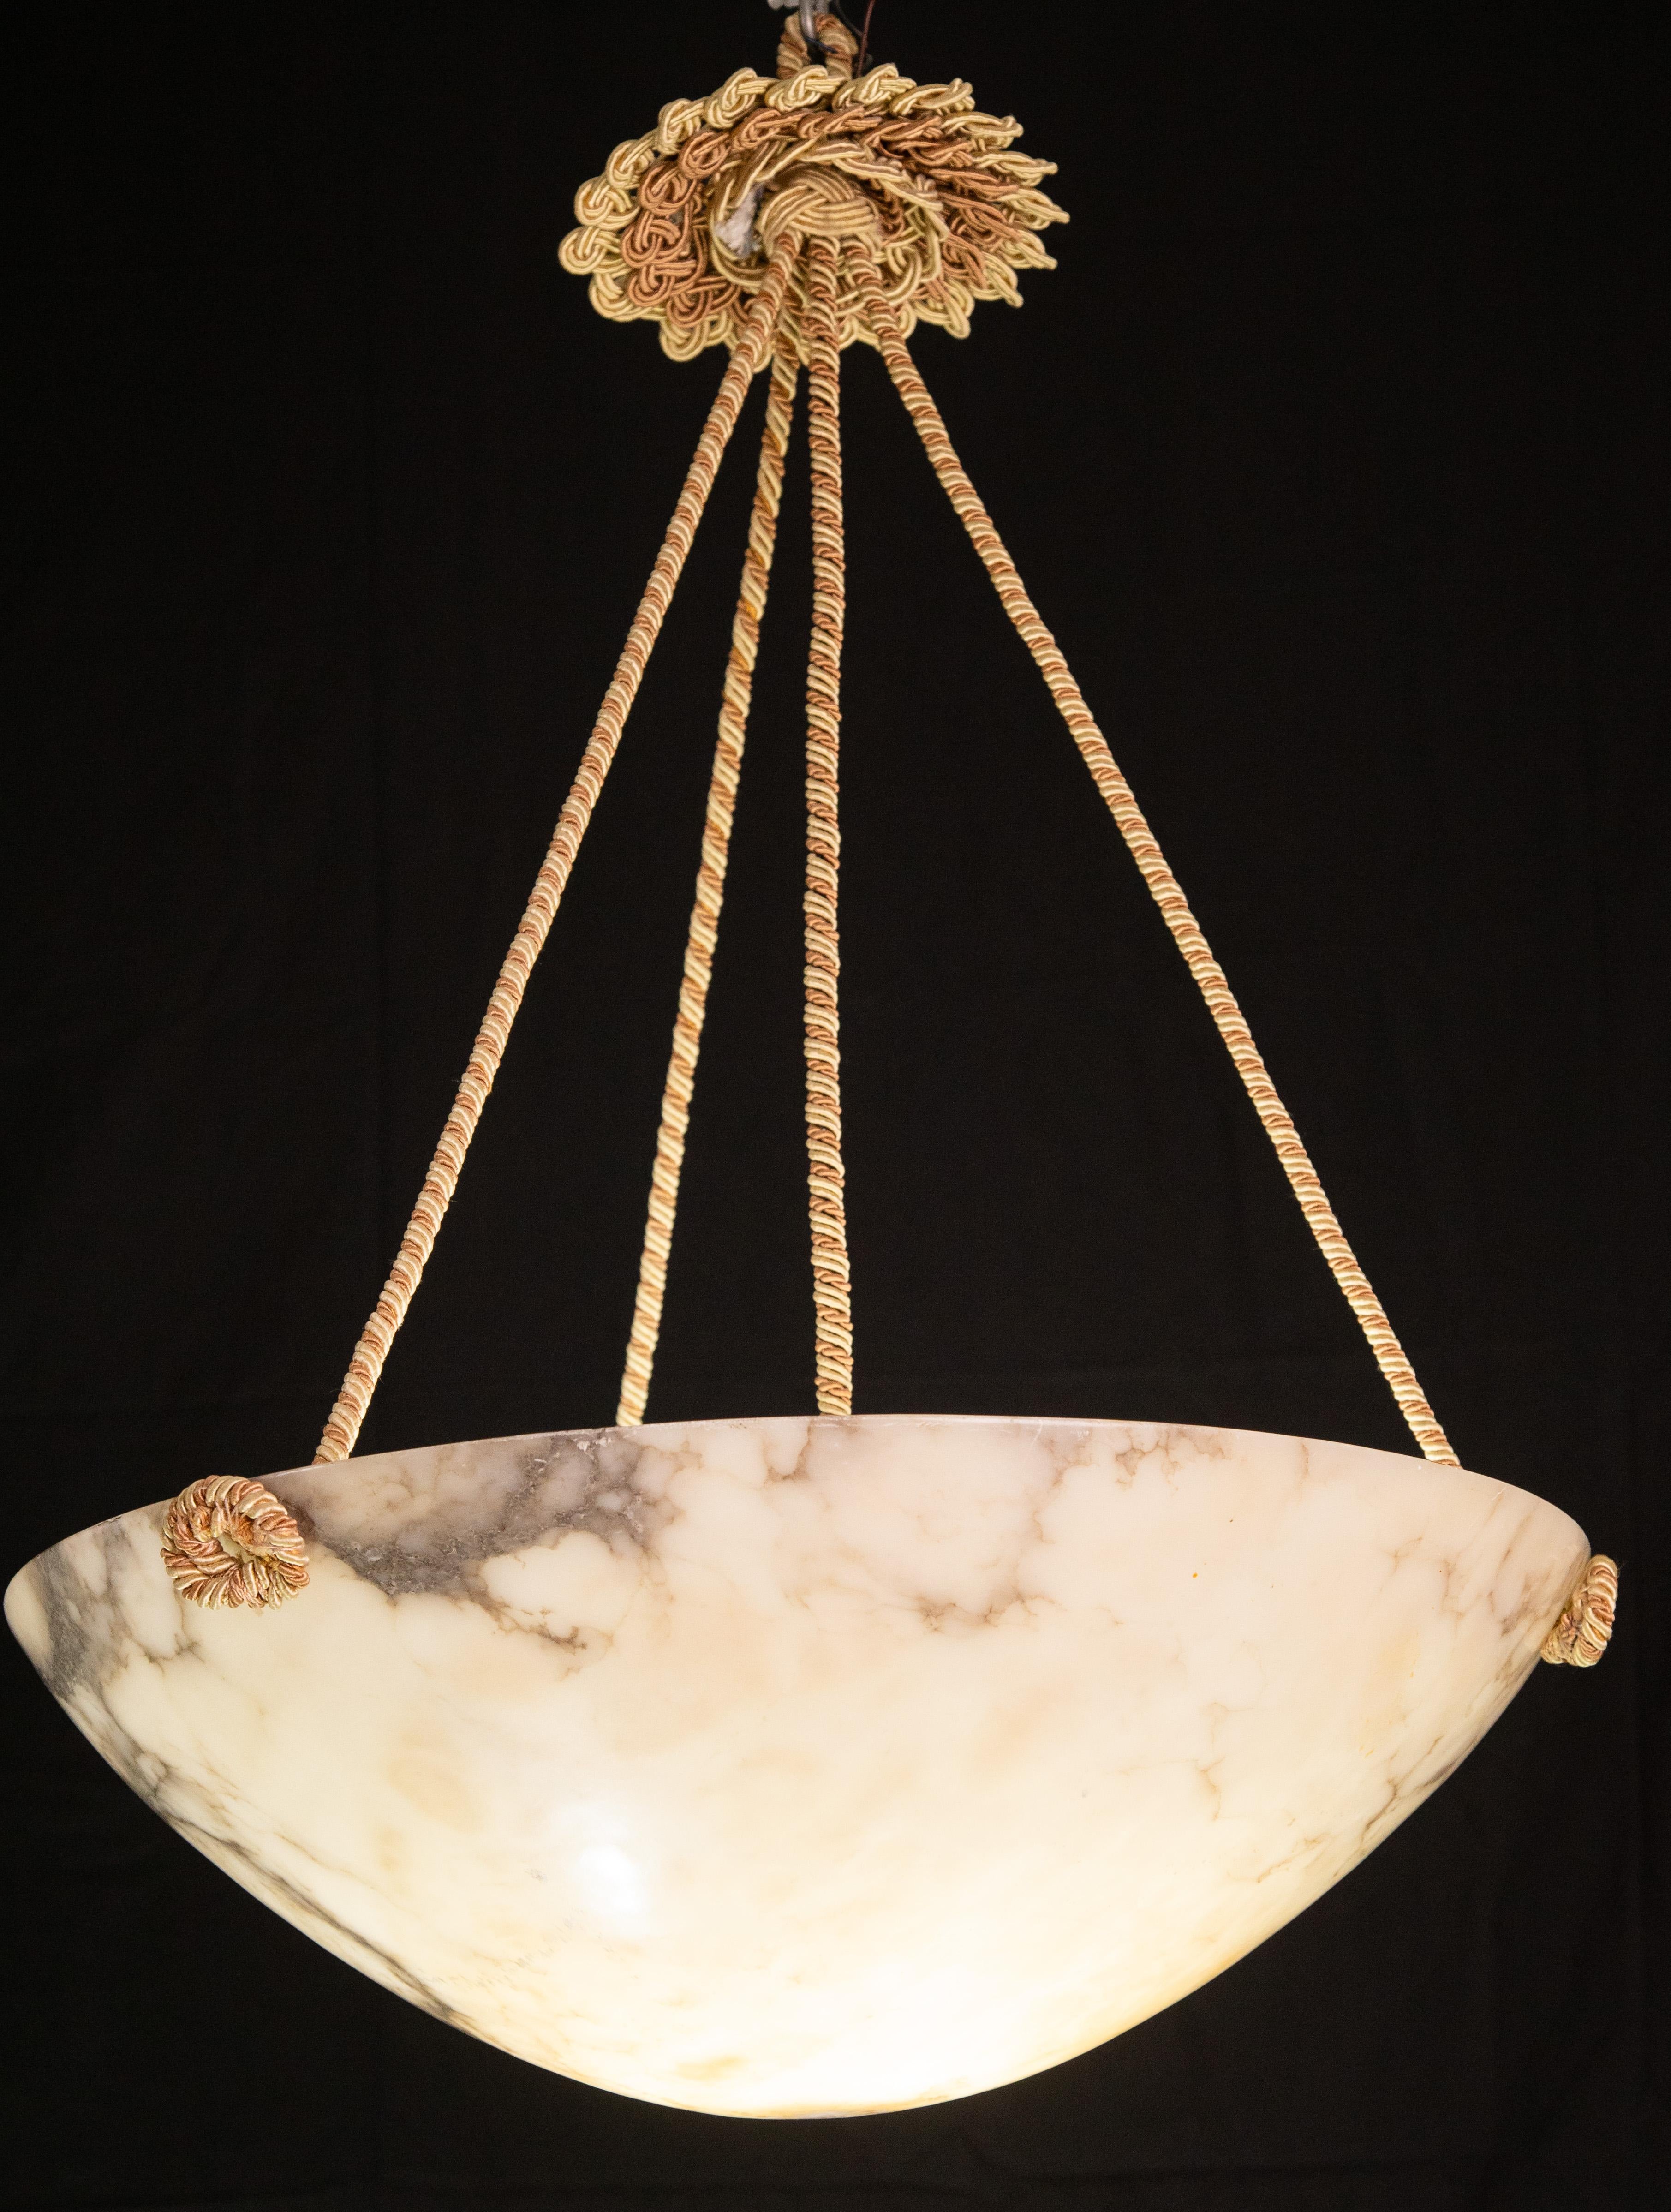 Extraordinary Antique white alabaster hanging chandelier in Art Deco style, circa 1950s, extremely rare because of its large diameter.
A unique piece in white alabaster, beautifully worked with shades and reflections of other colors when lit, still